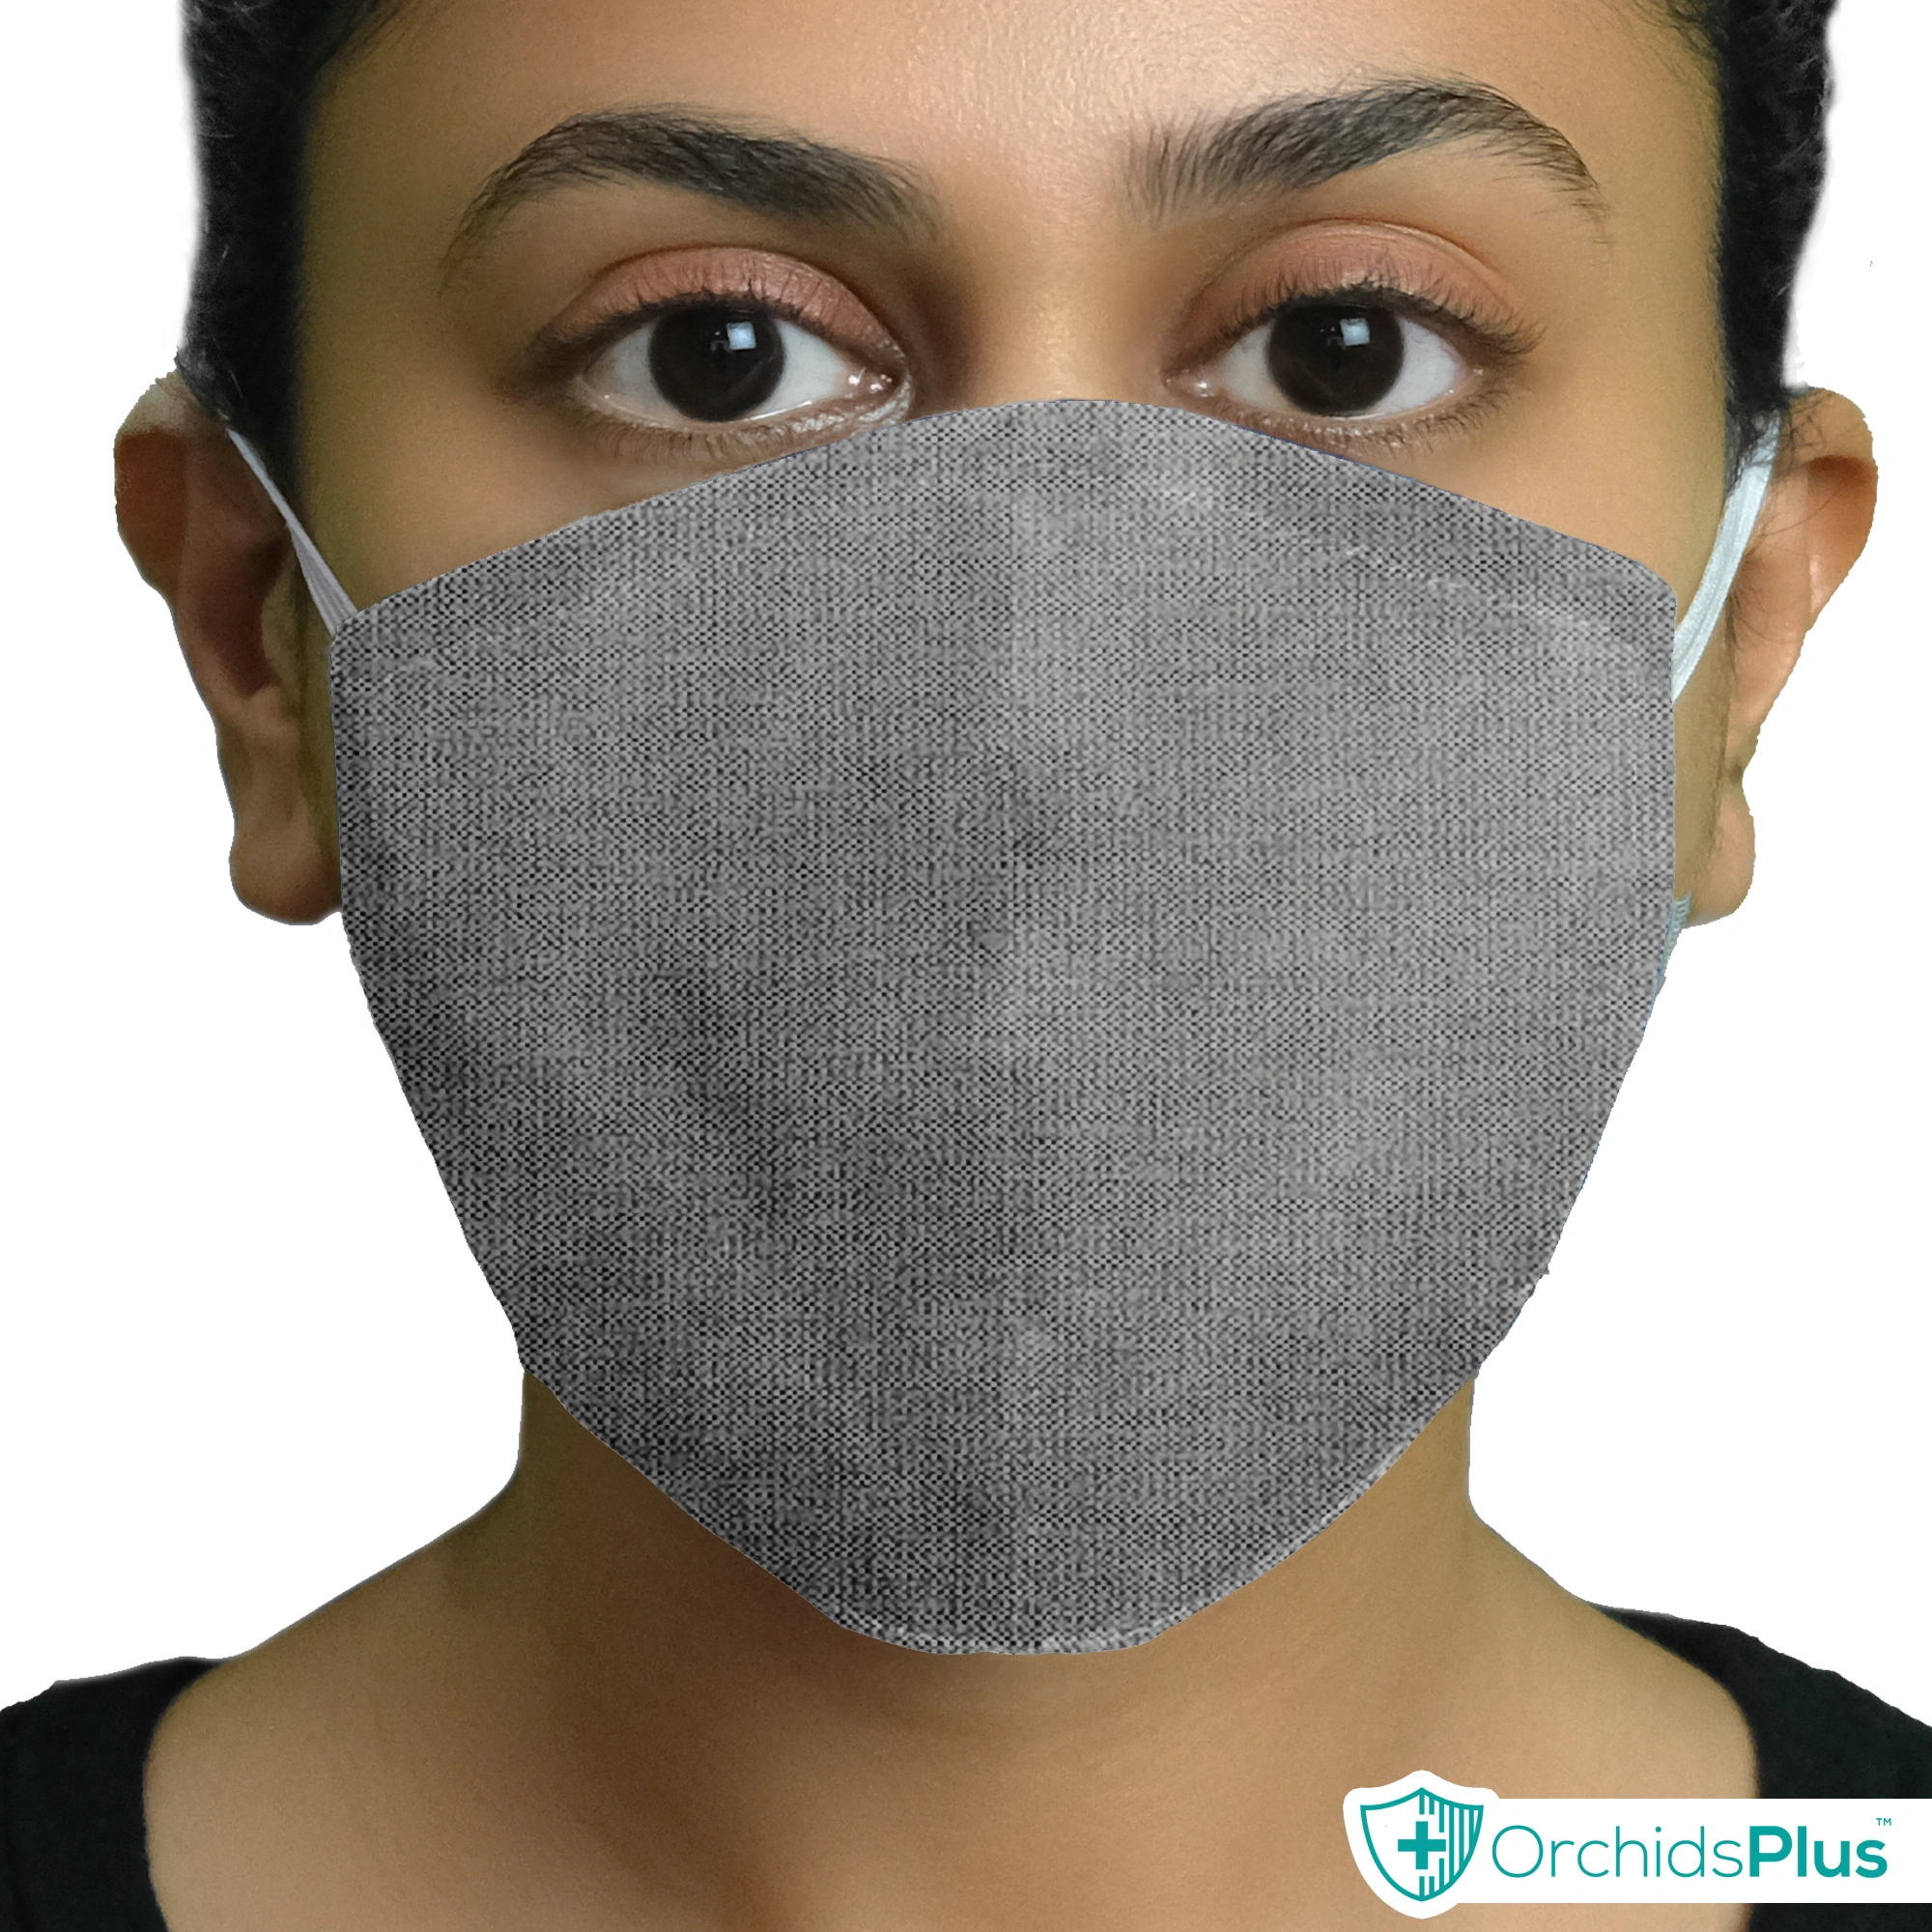 OrchidsPlus Active Face Mask | 2+ Layer | Washable | Reusable | Active Protection - Grey-5-2